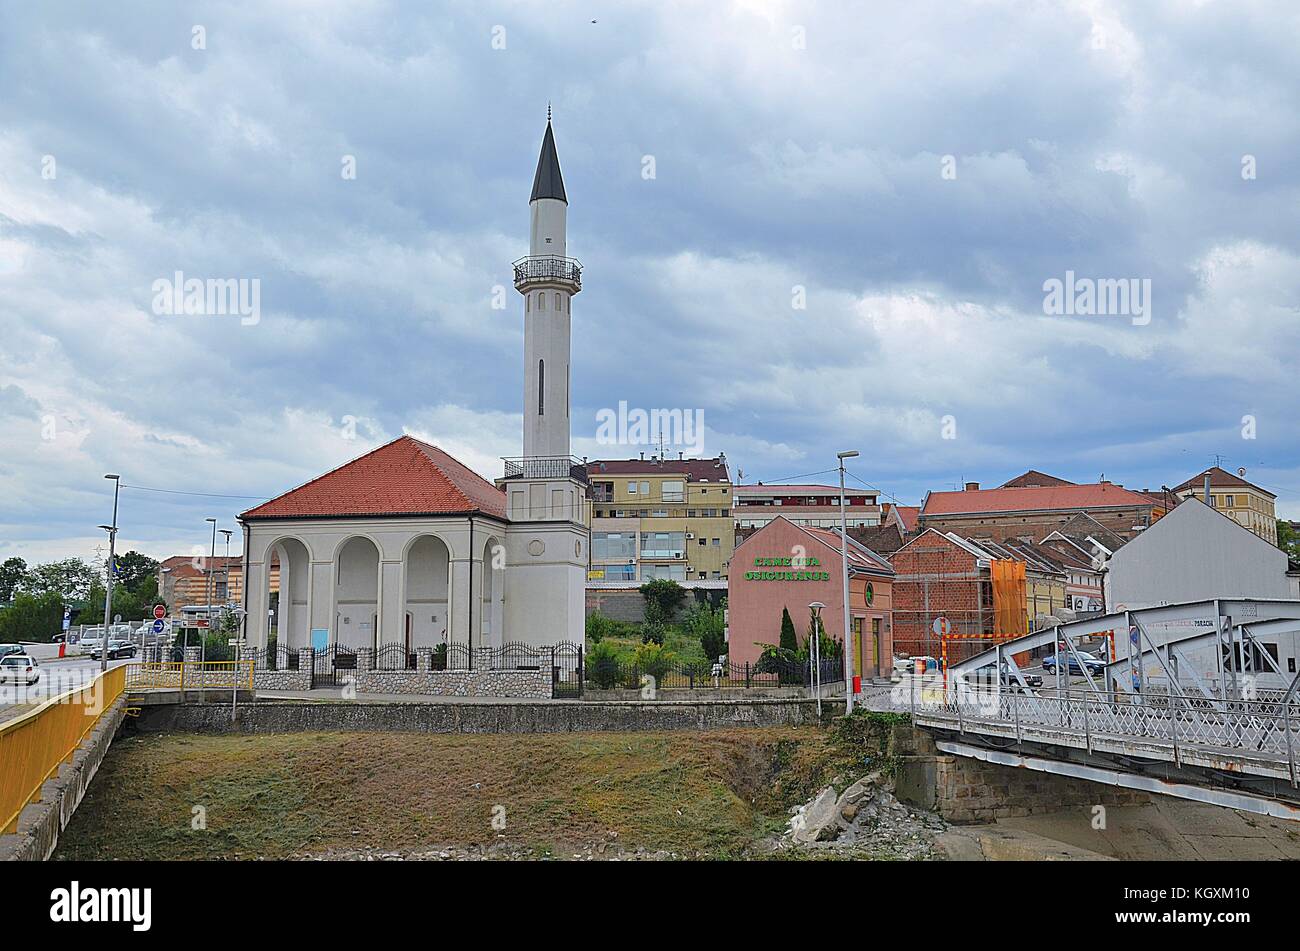 The town of Brčko in Northern Bosnia and Hercegovina Stock Photo